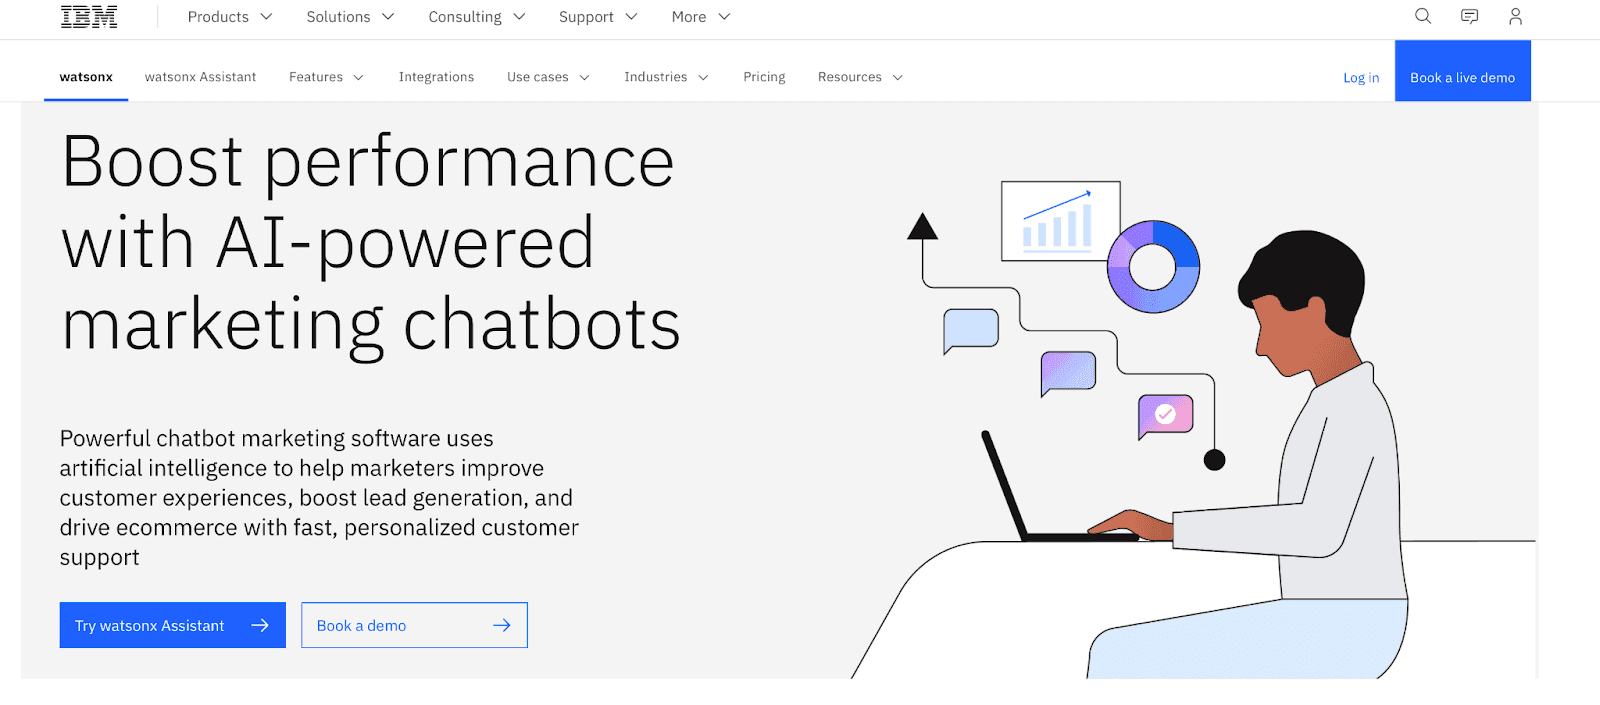 Boost performance with AI-powered marketing chatbots